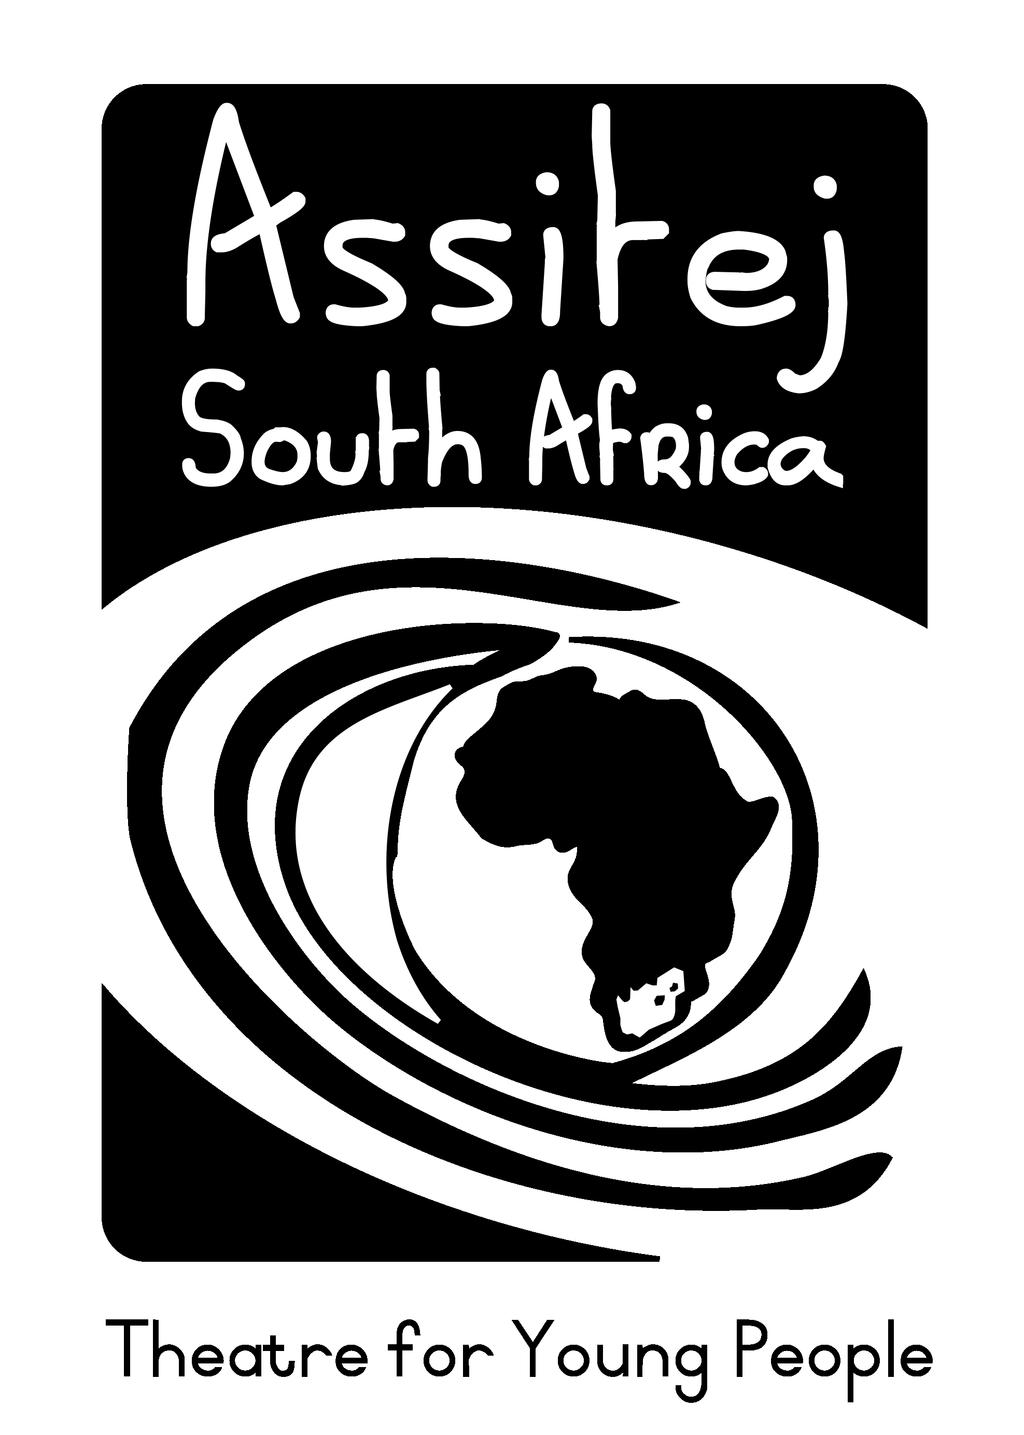 ASSITEJ South Africa is a registered NPO and Section 18A, which operates as a networking platform for people working with or interested in theatre for children and young people.